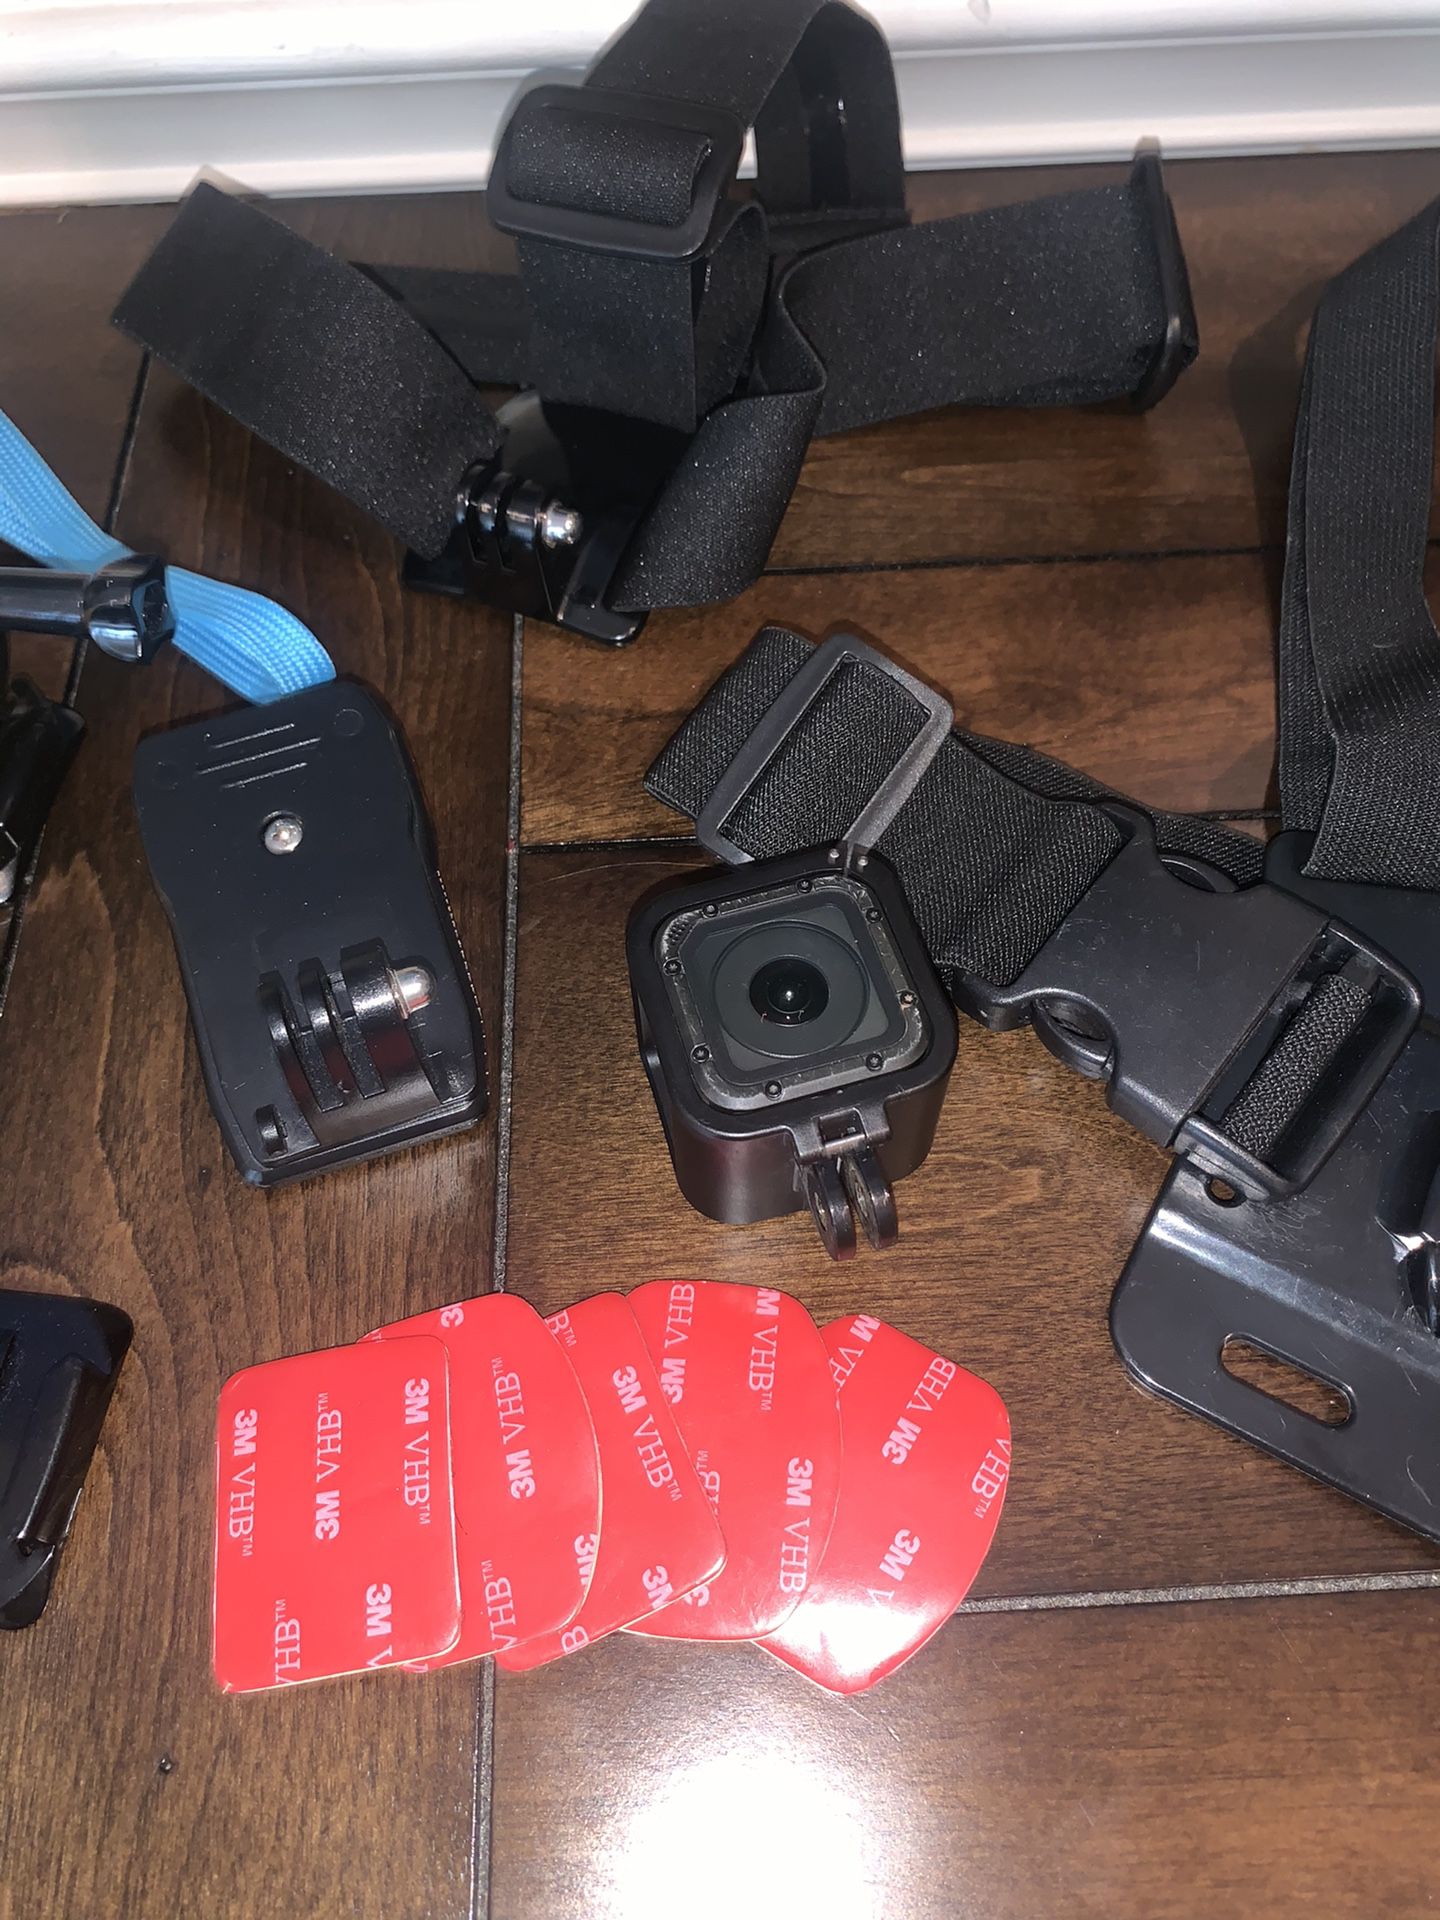 Go pro Hero 4 session with accessories